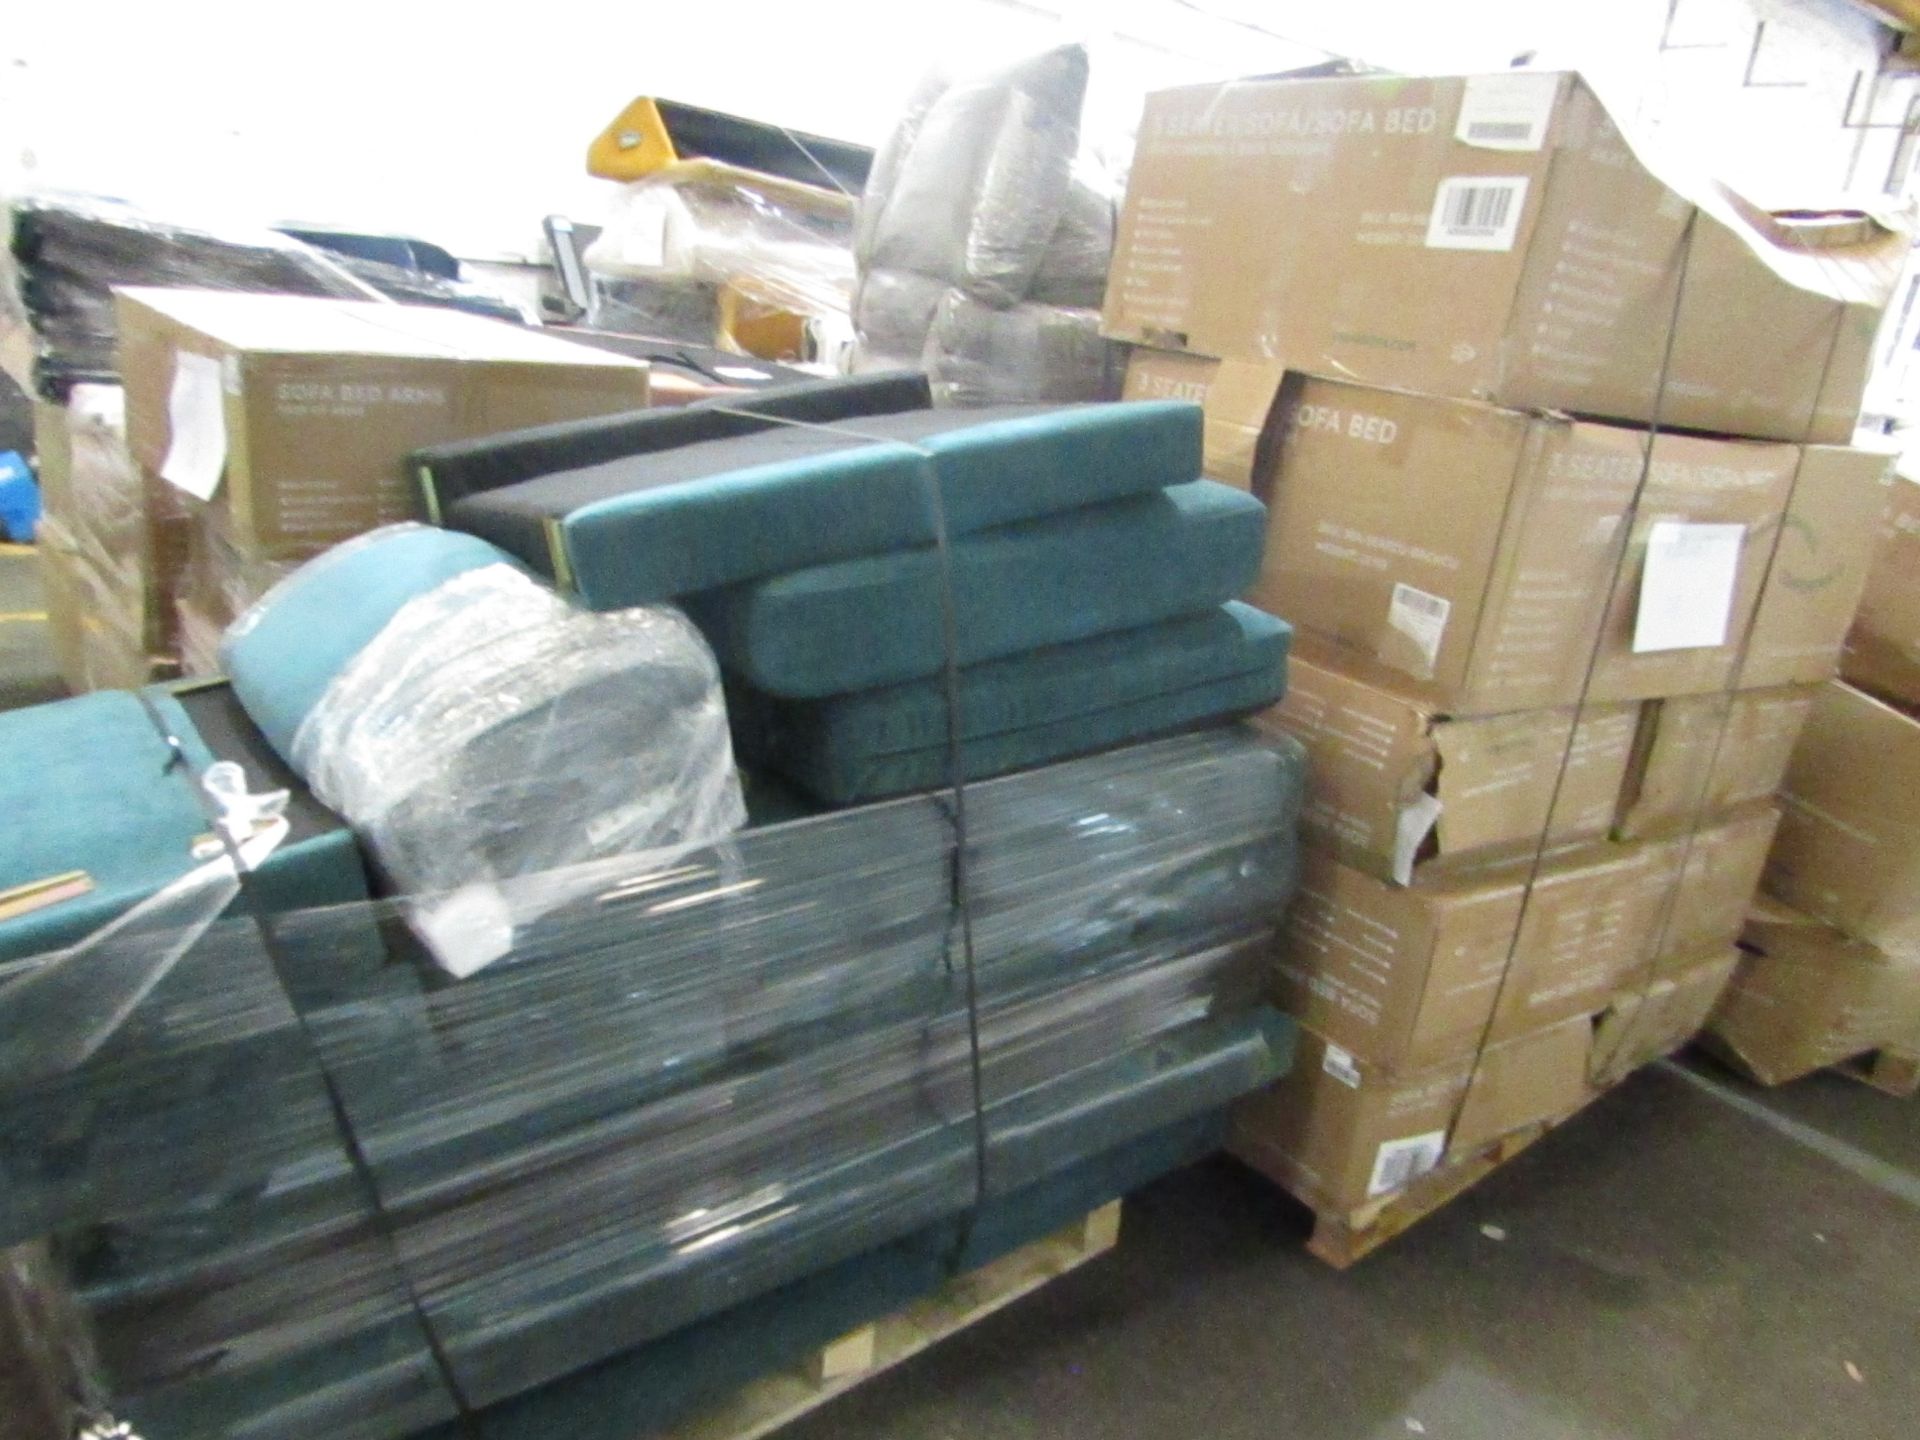 0% Buyers Premium, 24 Pallets of Genuine SNUG SOFA parts - Mixed Lots of Bases Backs Arms Cushions - Image 15 of 20